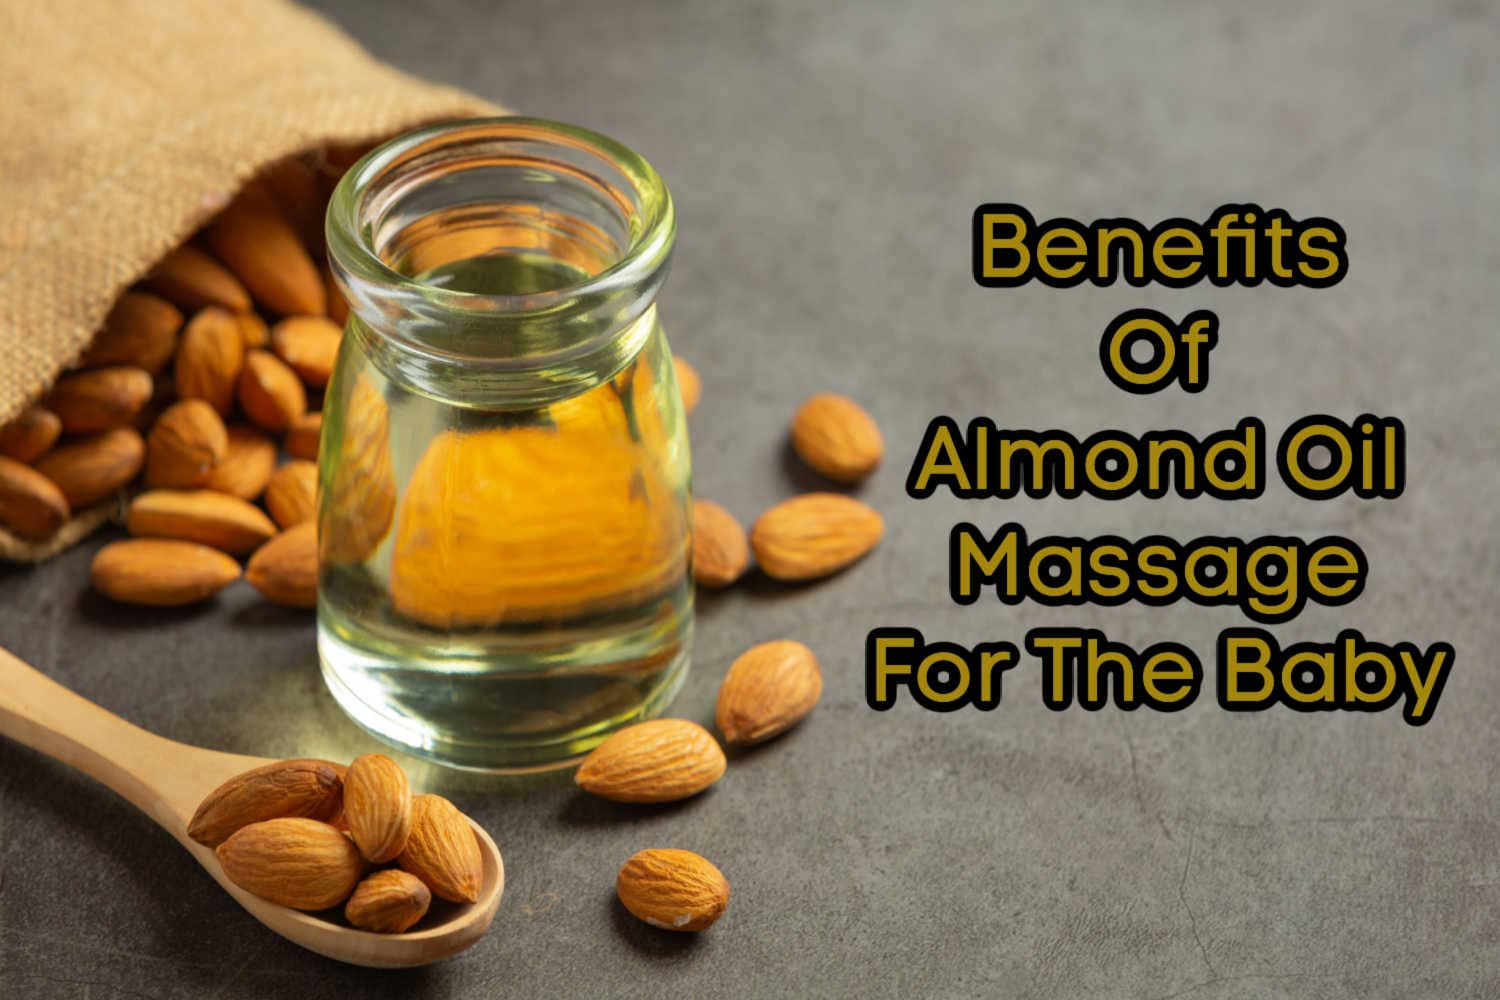 Benefits Of Almond Oil Massage For The Baby